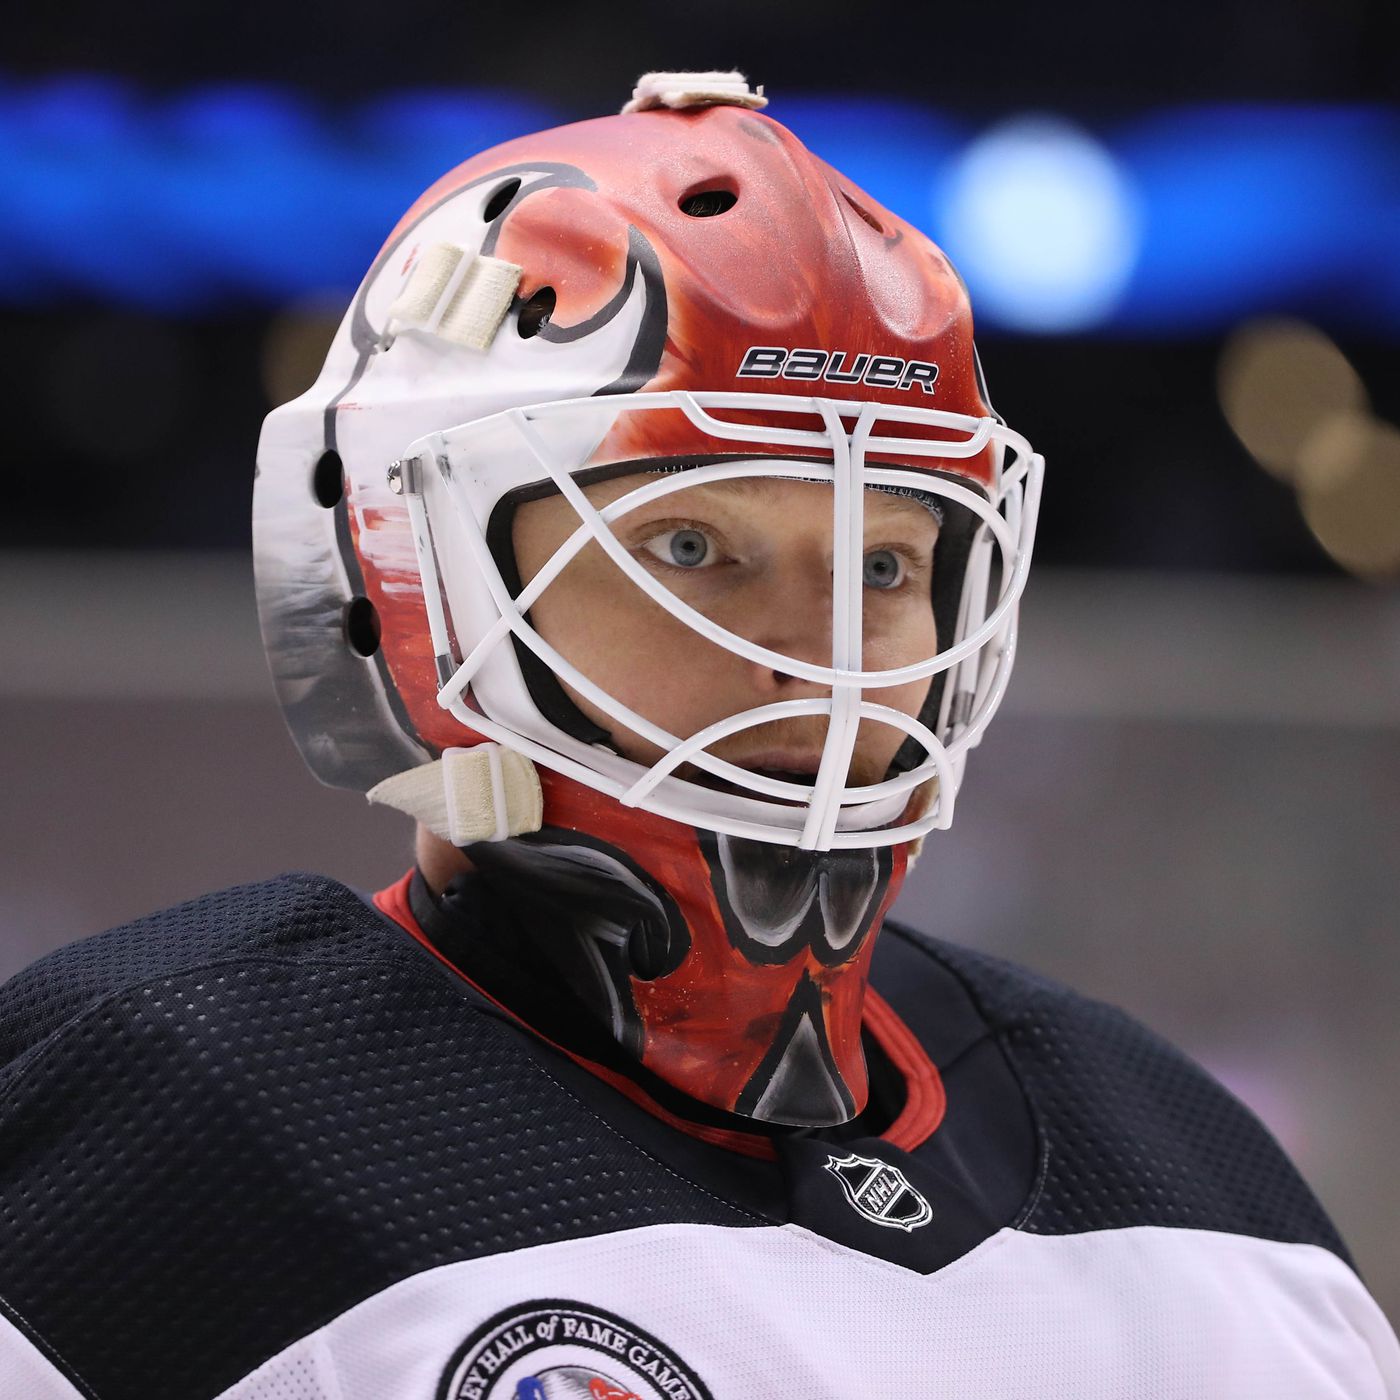 Cory Schneider Struggles, BDevils Lose 7-5 to Amerks - All About ...